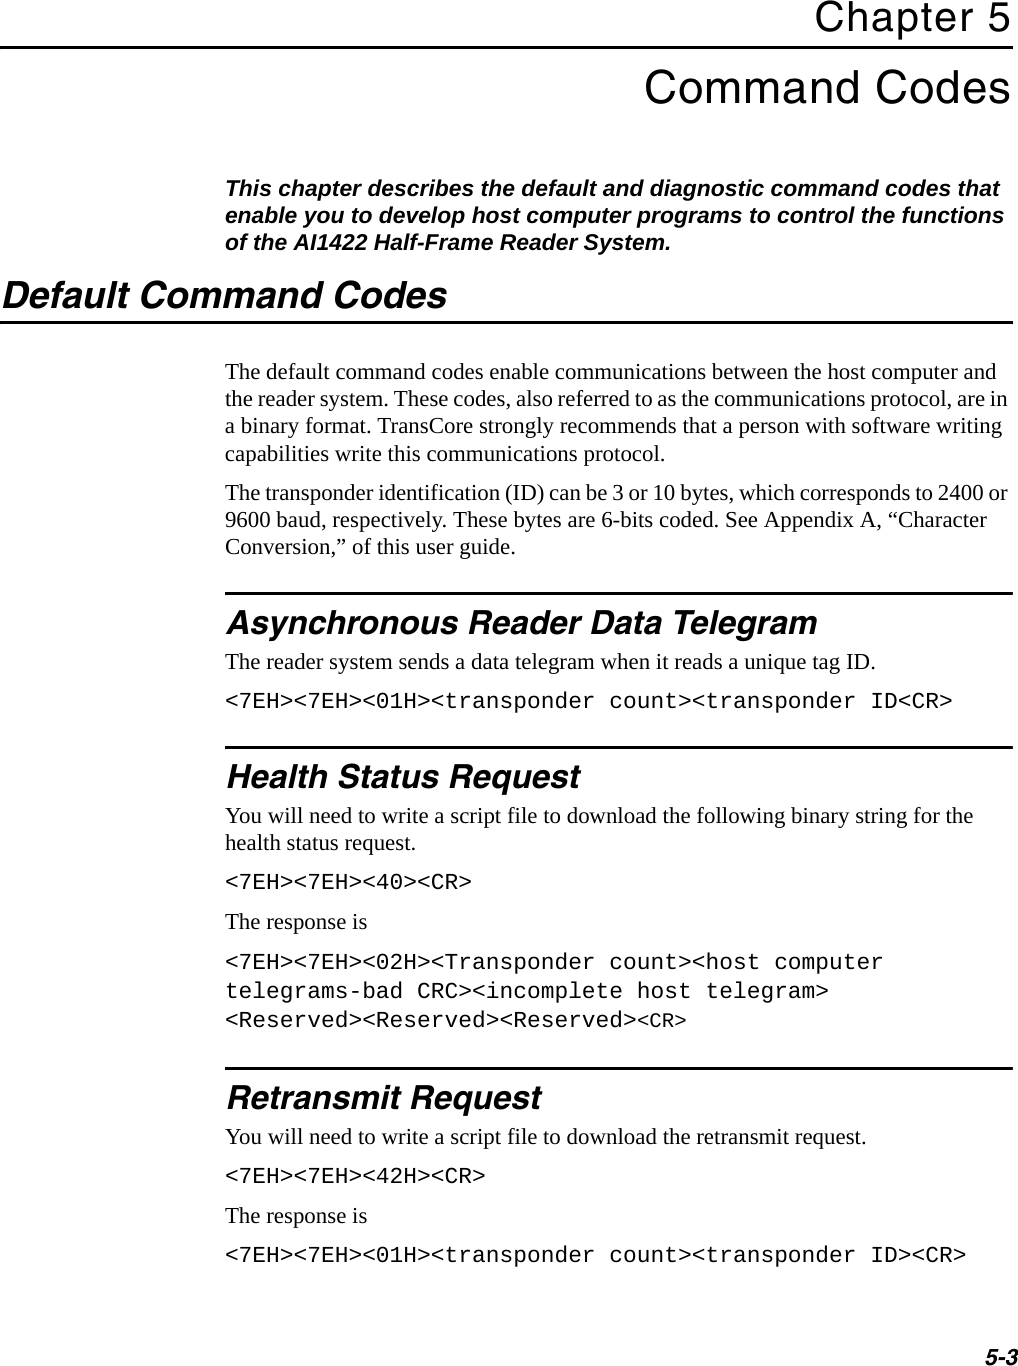 5-3Chapter 5Command CodesThis chapter describes the default and diagnostic command codes that enable you to develop host computer programs to control the functions of the AI1422 Half-Frame Reader System.Default Command CodesThe default command codes enable communications between the host computer and the reader system. These codes, also referred to as the communications protocol, are in a binary format. TransCore strongly recommends that a person with software writing capabilities write this communications protocol.The transponder identification (ID) can be 3 or 10 bytes, which corresponds to 2400 or 9600 baud, respectively. These bytes are 6-bits coded. See Appendix A, “Character Conversion,” of this user guide.Asynchronous Reader Data TelegramThe reader system sends a data telegram when it reads a unique tag ID.&lt;7EH&gt;&lt;7EH&gt;&lt;01H&gt;&lt;transponder count&gt;&lt;transponder ID&lt;CR&gt;Health Status RequestYou will need to write a script file to download the following binary string for the health status request.&lt;7EH&gt;&lt;7EH&gt;&lt;40&gt;&lt;CR&gt;The response is&lt;7EH&gt;&lt;7EH&gt;&lt;02H&gt;&lt;Transponder count&gt;&lt;host computer telegrams-bad CRC&gt;&lt;incomplete host telegram&gt; &lt;Reserved&gt;&lt;Reserved&gt;&lt;Reserved&gt;&lt;CR&gt;Retransmit RequestYou will need to write a script file to download the retransmit request.&lt;7EH&gt;&lt;7EH&gt;&lt;42H&gt;&lt;CR&gt;The response is&lt;7EH&gt;&lt;7EH&gt;&lt;01H&gt;&lt;transponder count&gt;&lt;transponder ID&gt;&lt;CR&gt;